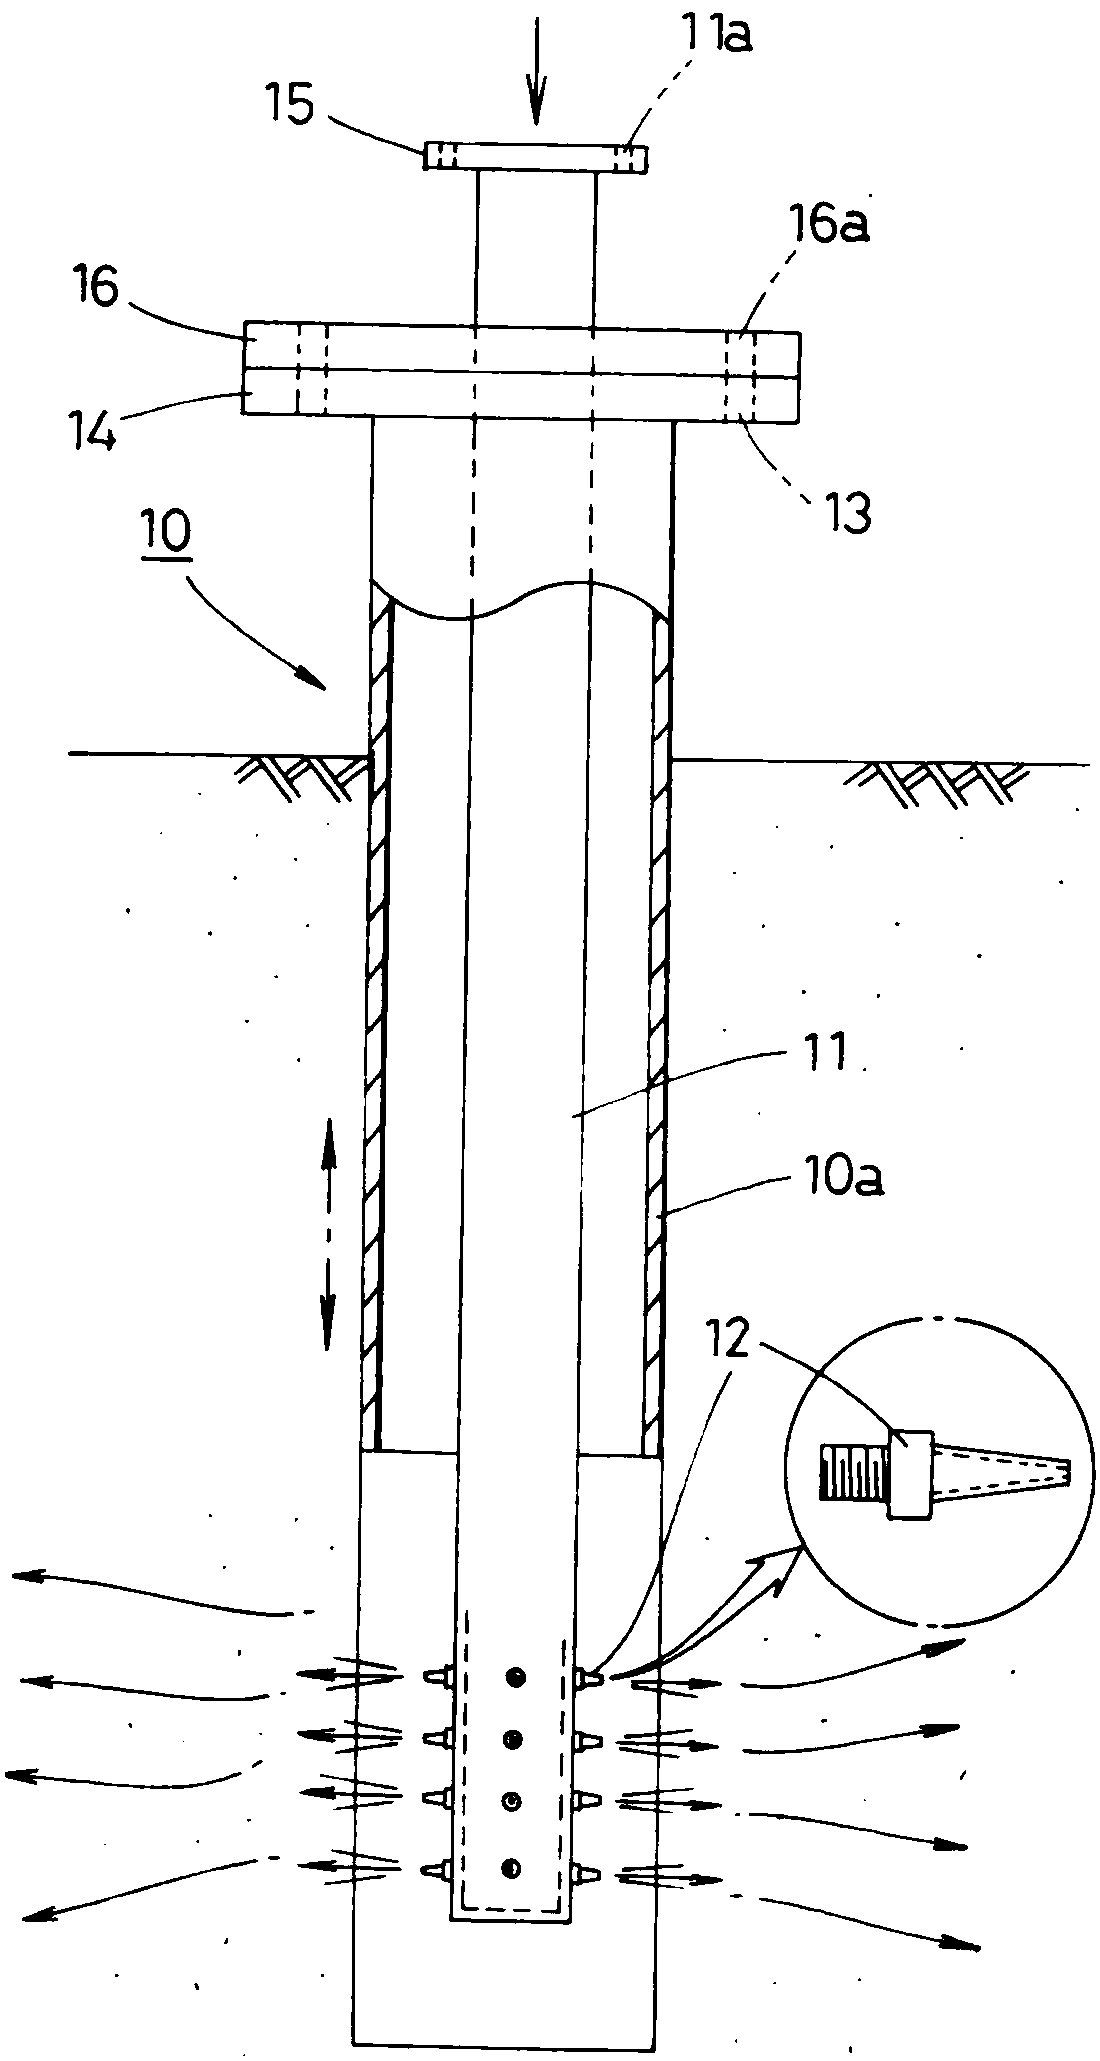 In Situ Treatment Apparatus applying Pneumatic Fracturing and Forced Extraction for oil contaminated Soil